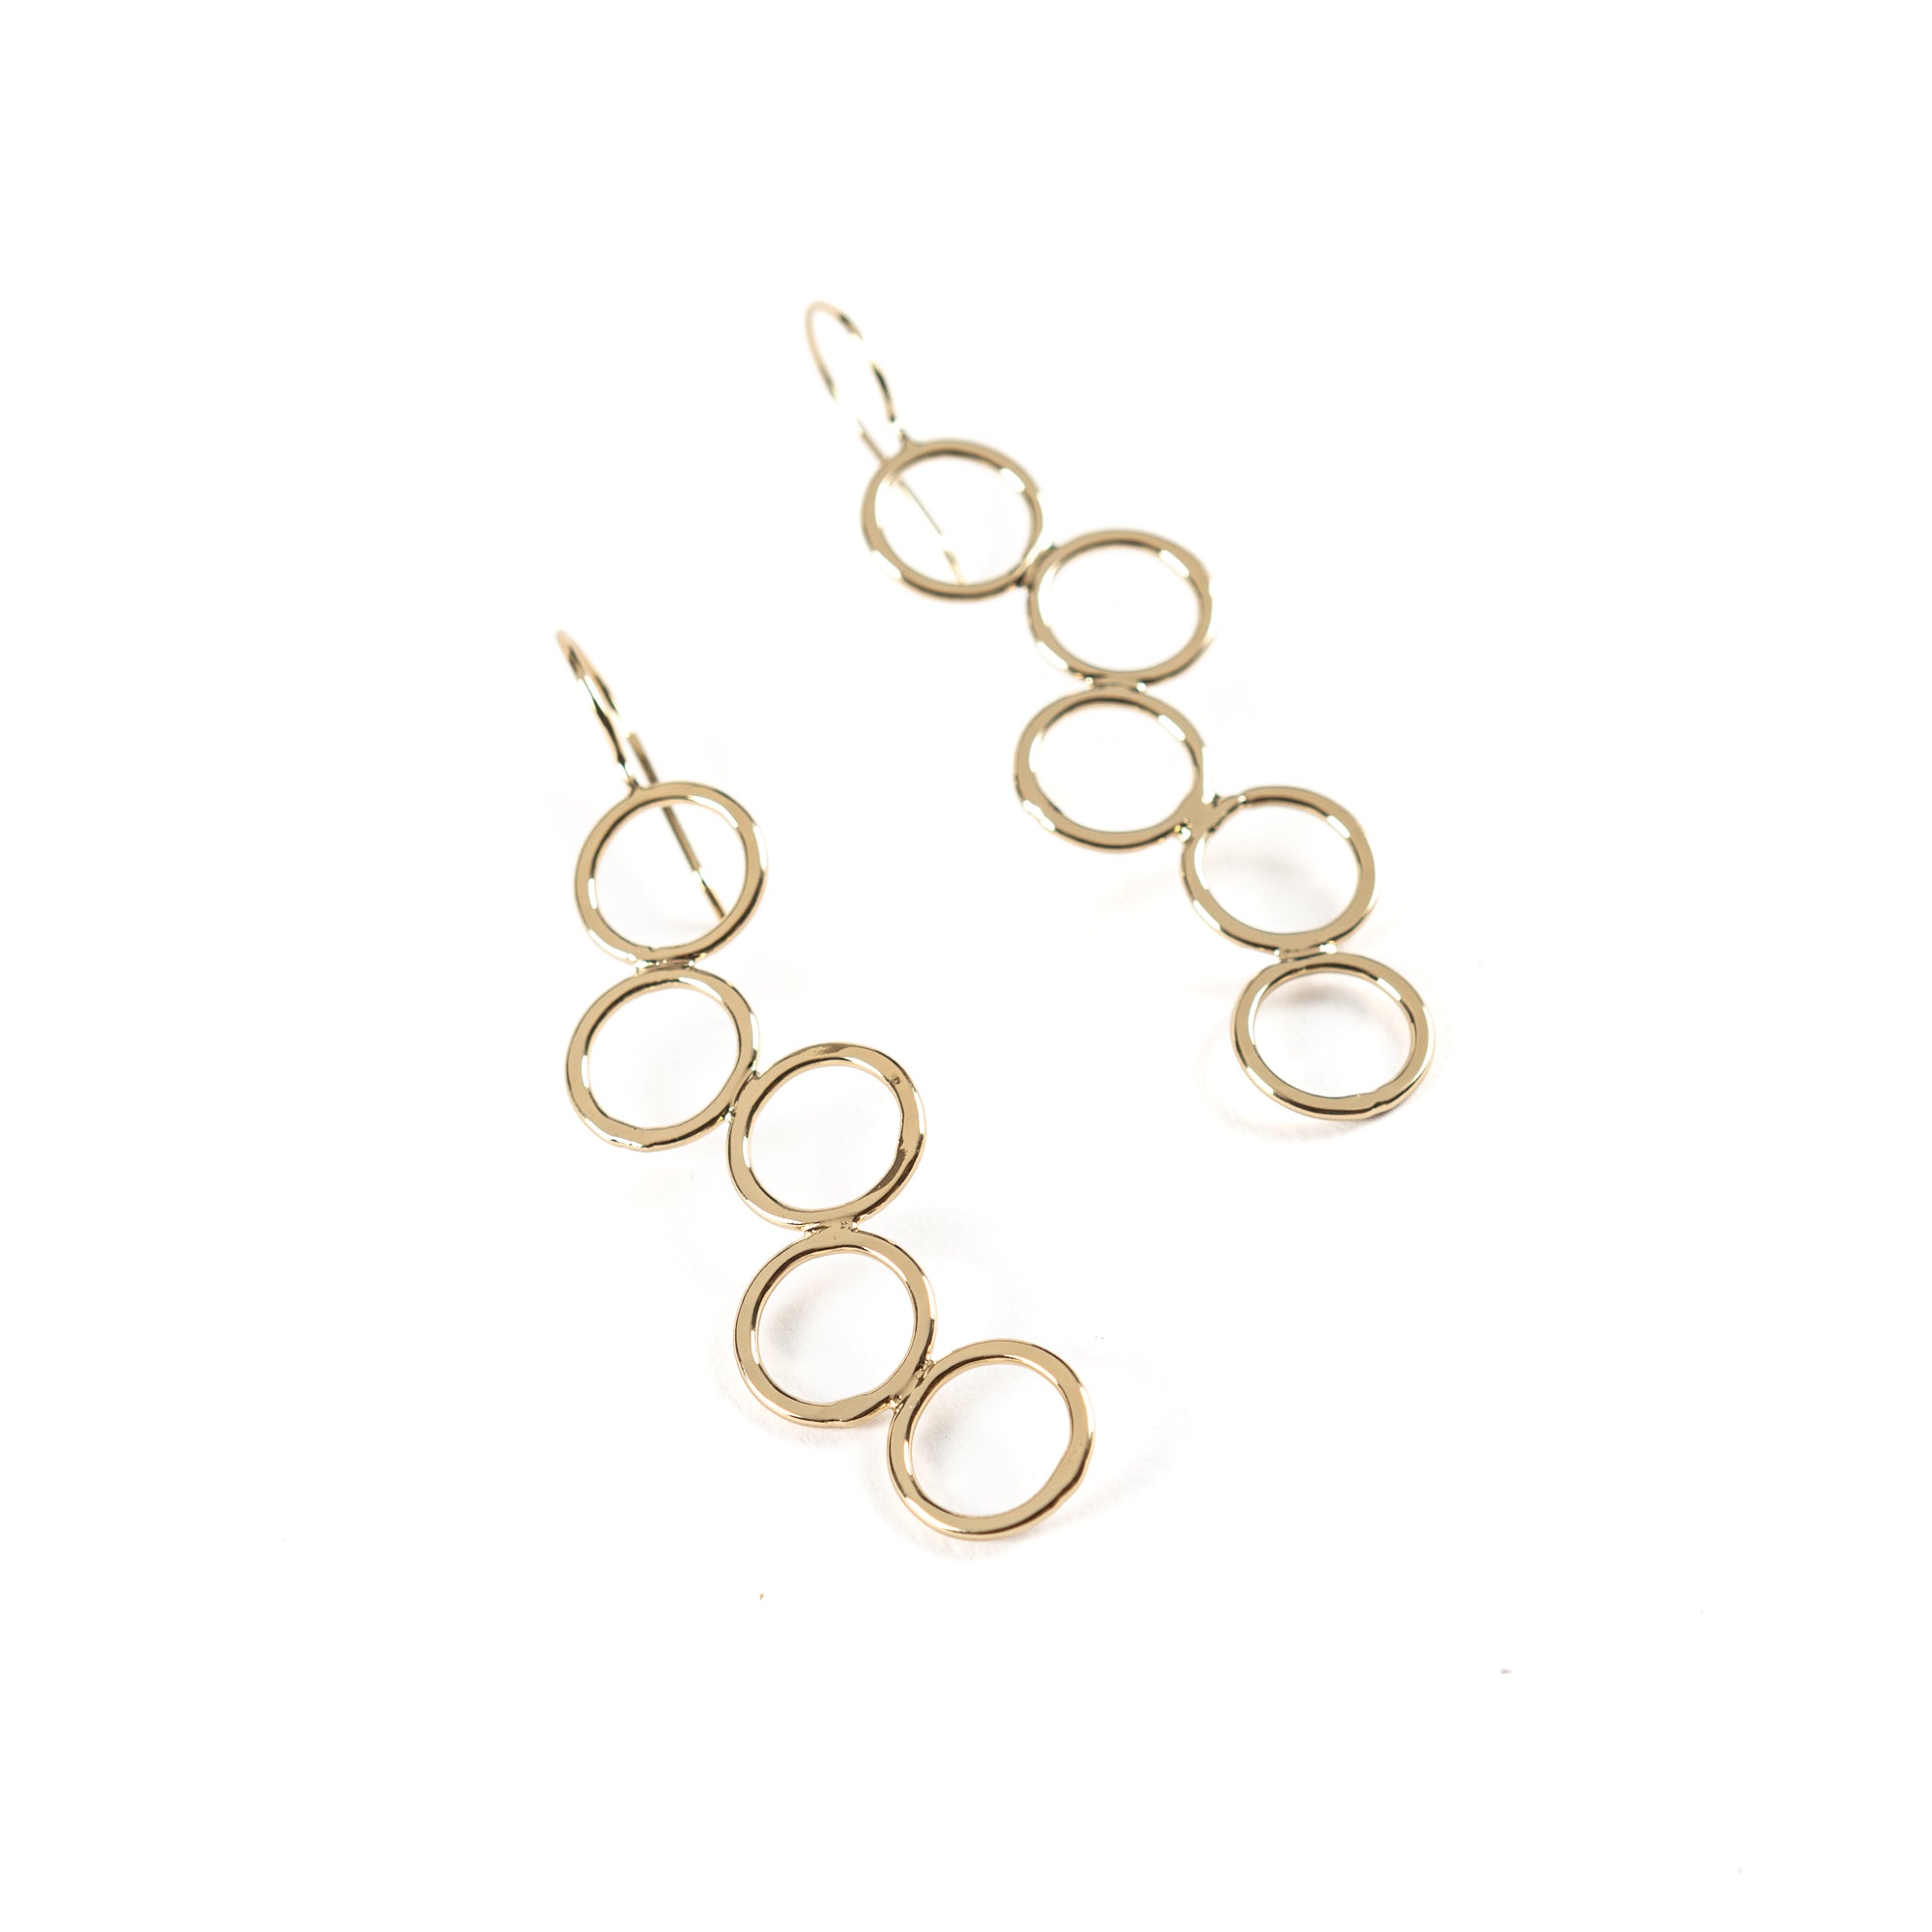 Earrings 5 Gold Plated Rigs